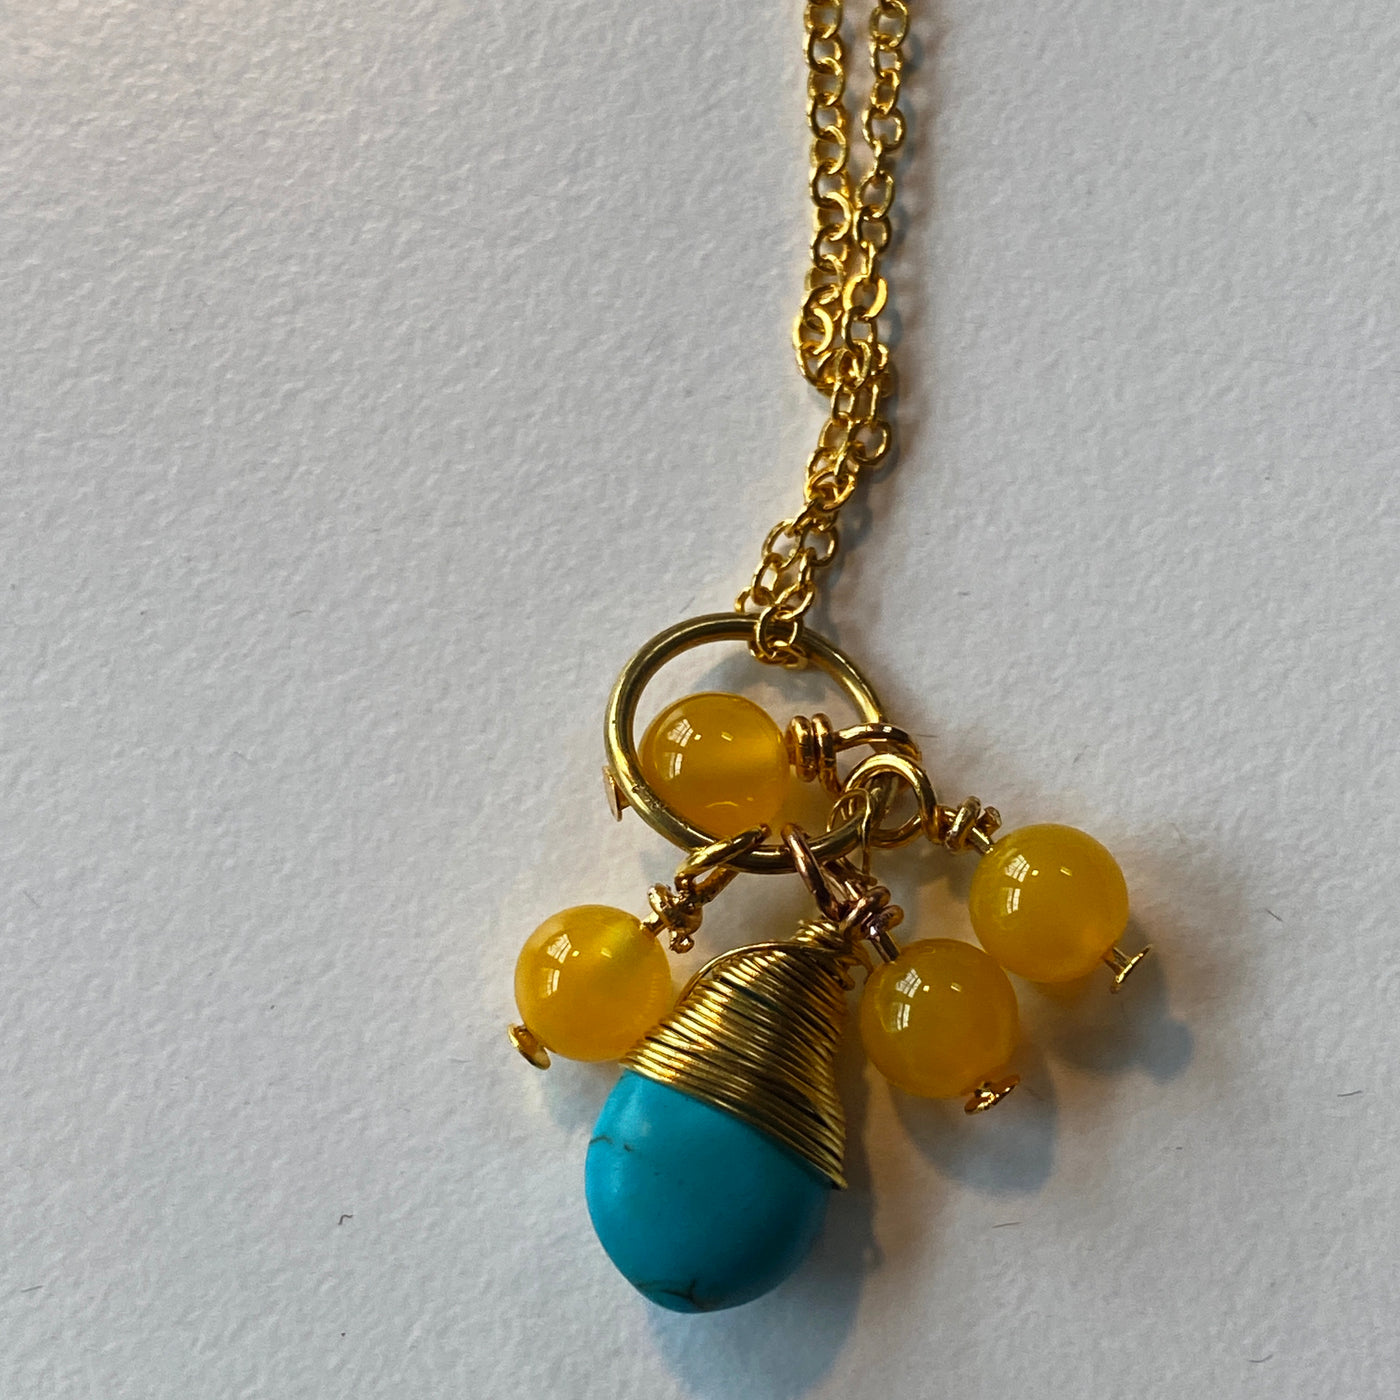 Turquoise briolette, yellow agate pendant. Shake and Move collection